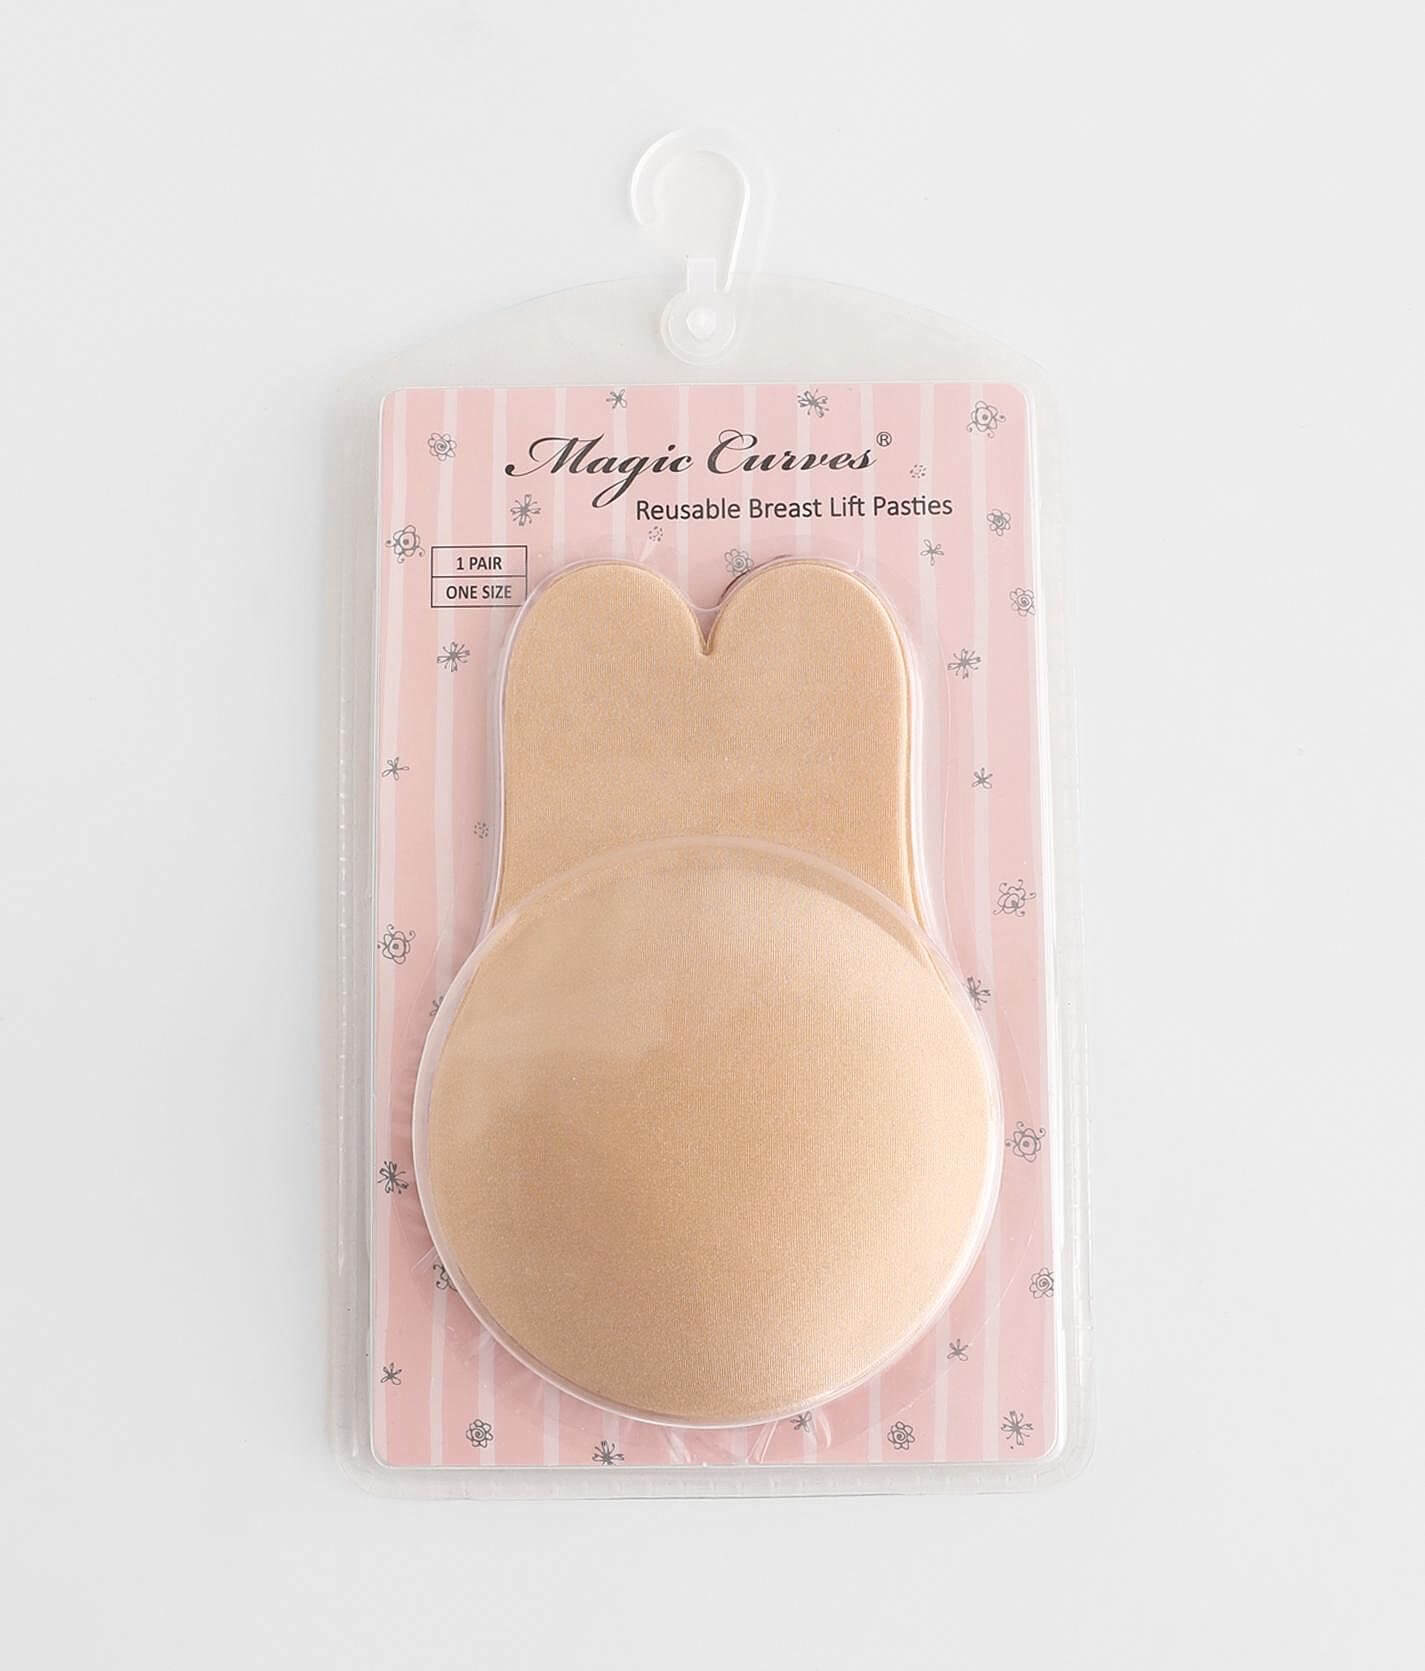 Magic Curves® Reusable Breast Lift Pasties - Women's Intimates in